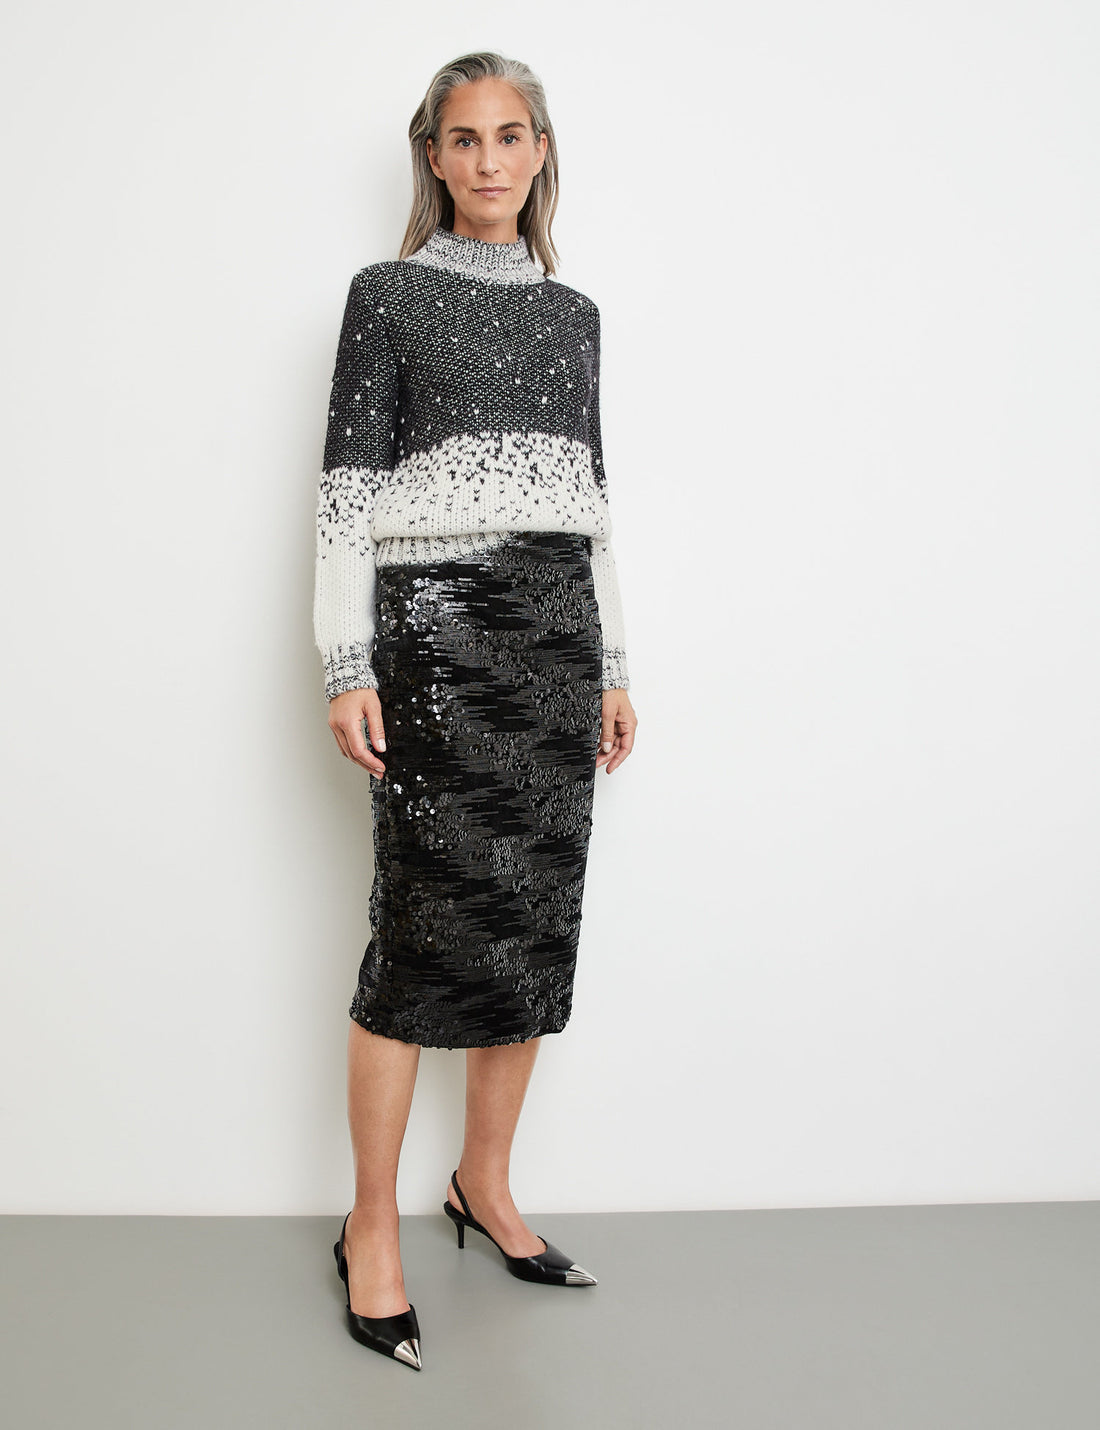 Pencil Skirt With Sequins And A Dividing Seam_210023-31529_11000_01